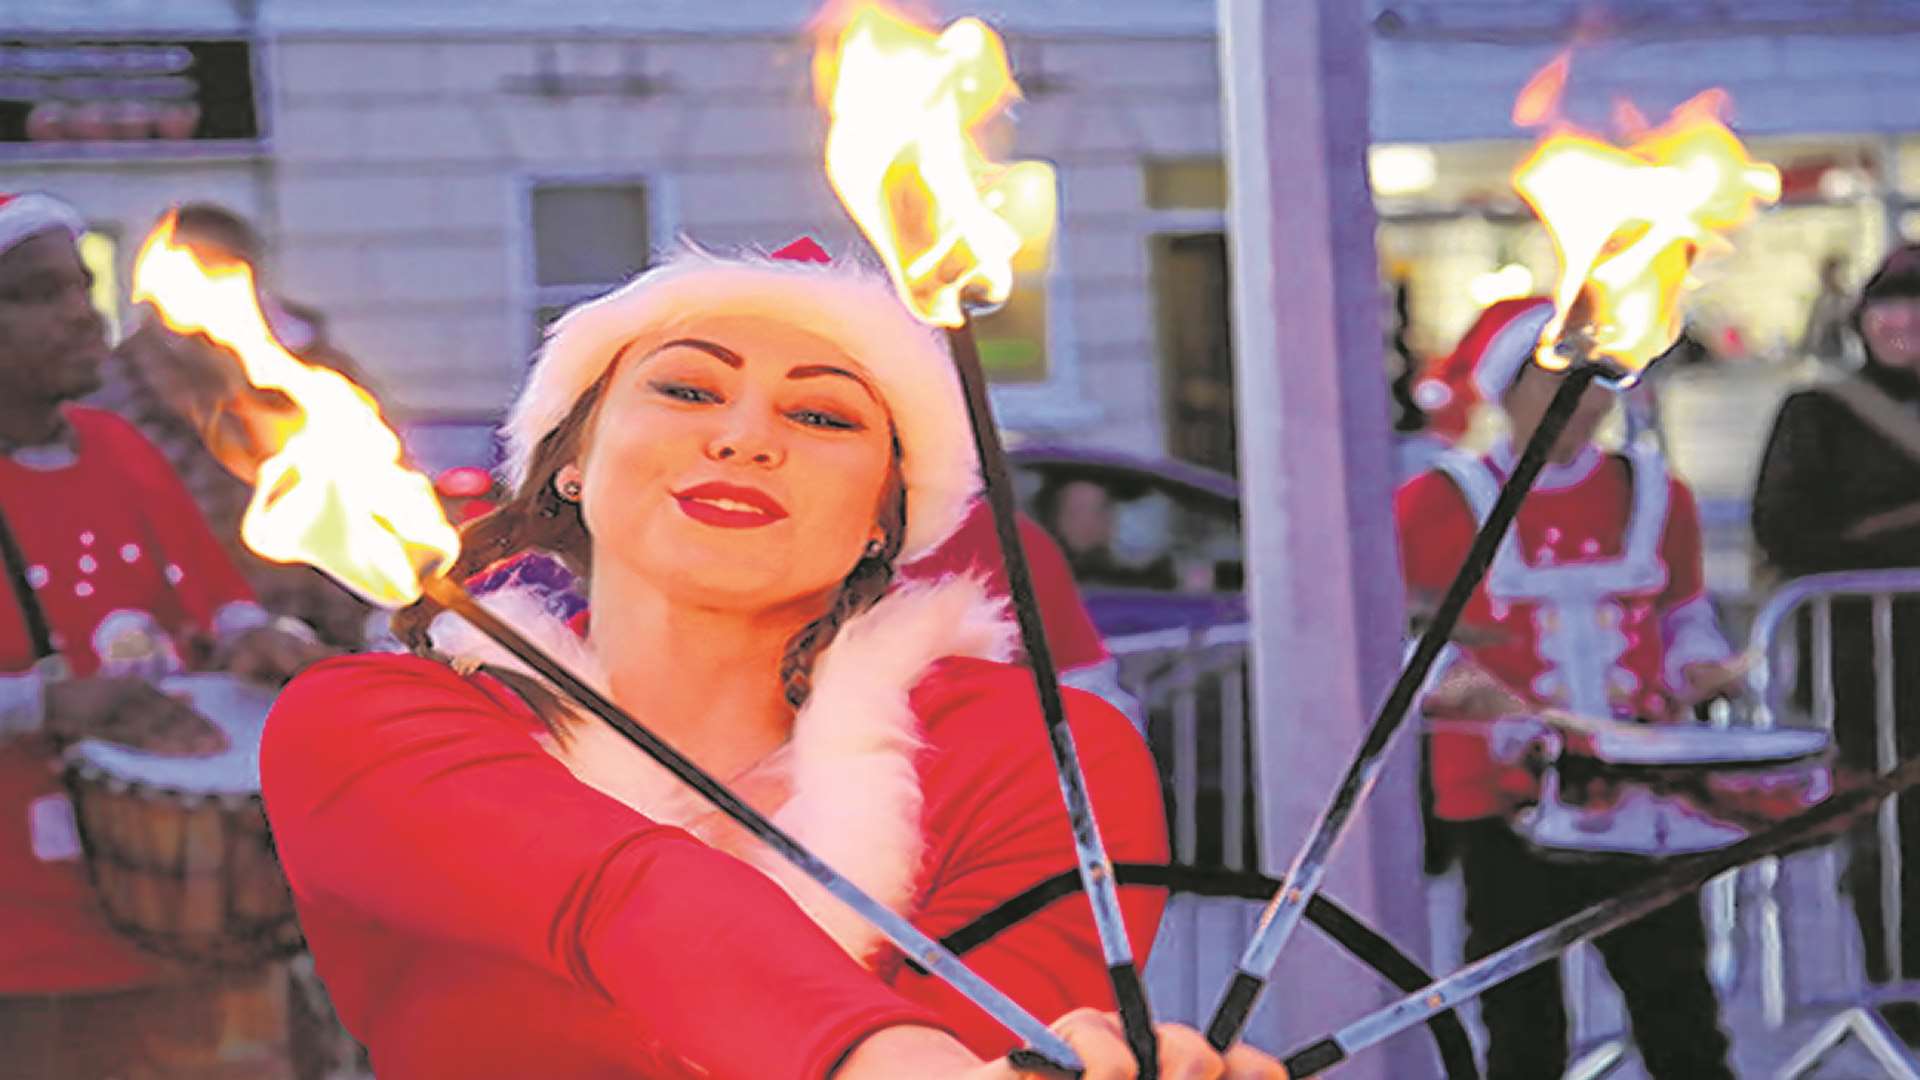 Things are heating up in Gravesend this weekend as patr of its series of Frost Fairs